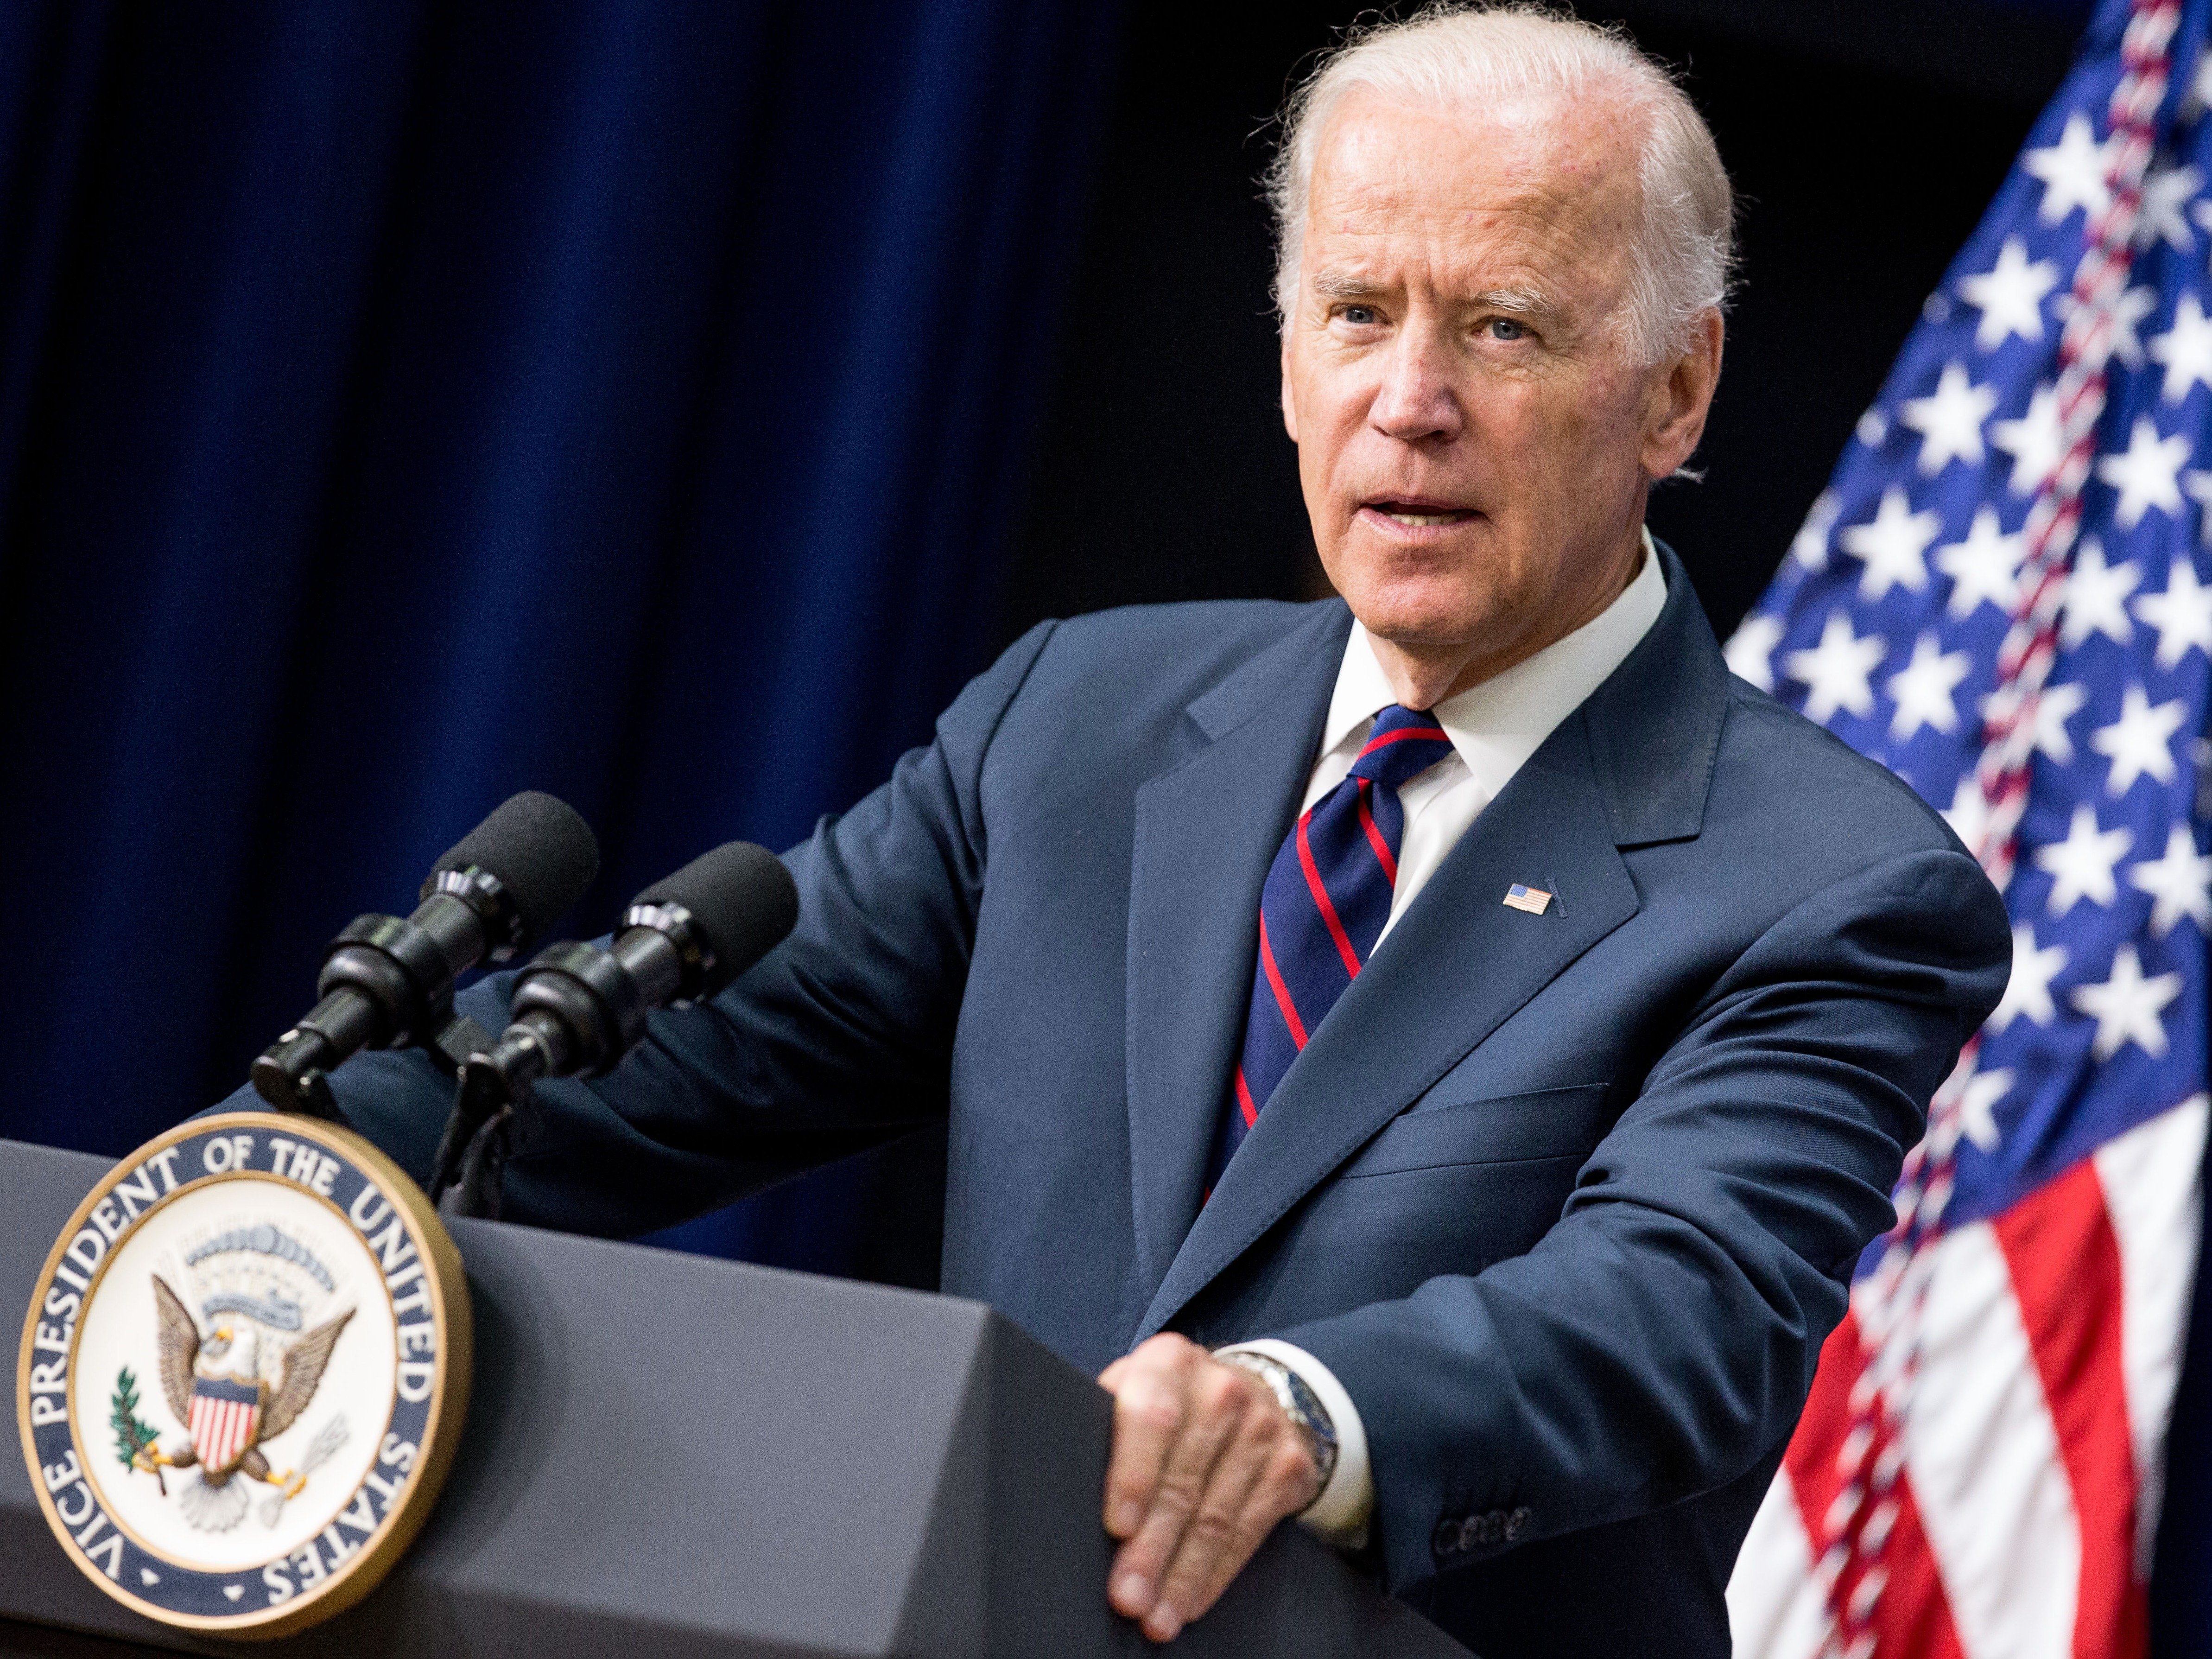 biden-opted-out-on-2016-dem-race-because-he-couldn-t-win